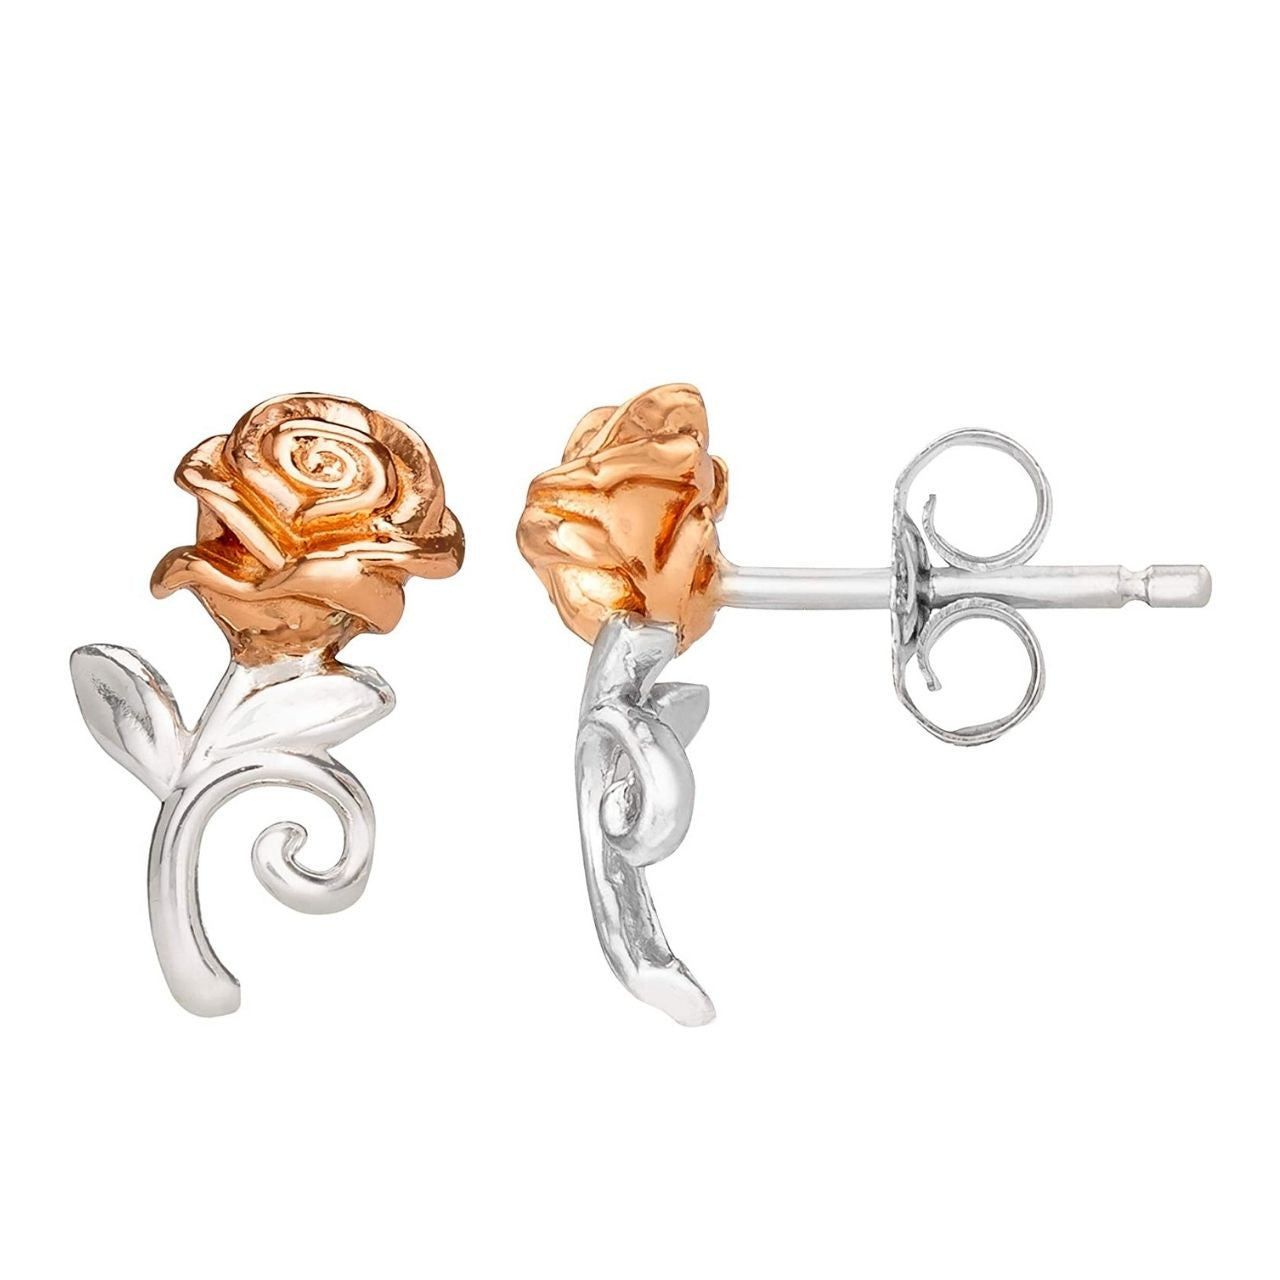 Disney Princess Silver and Rose Gold Earrings  Beautiful silver and rose gold Princess rose earrings adding a feminine touch to the Disney classic piece of Jewellery.  Trendy and fashionable design, the Disney Princess collection, sterling silver and rose gold earrings add a chic, fun touch to any outfit.